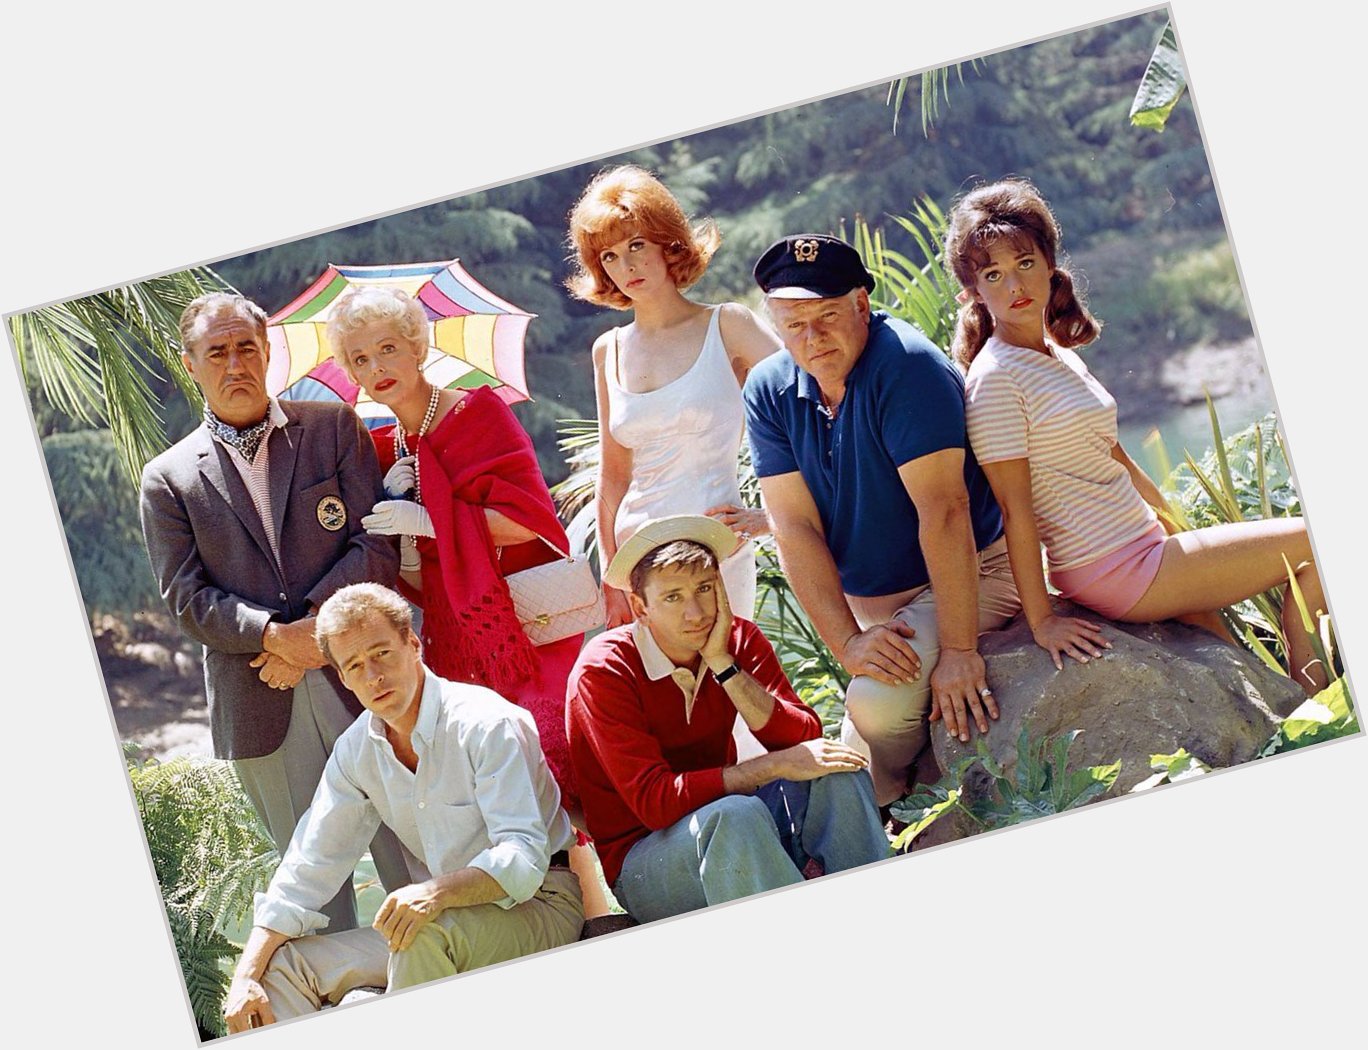 Happy Birthday to Dawn Wells(far right, sitting on rock) who turns 79 today! 